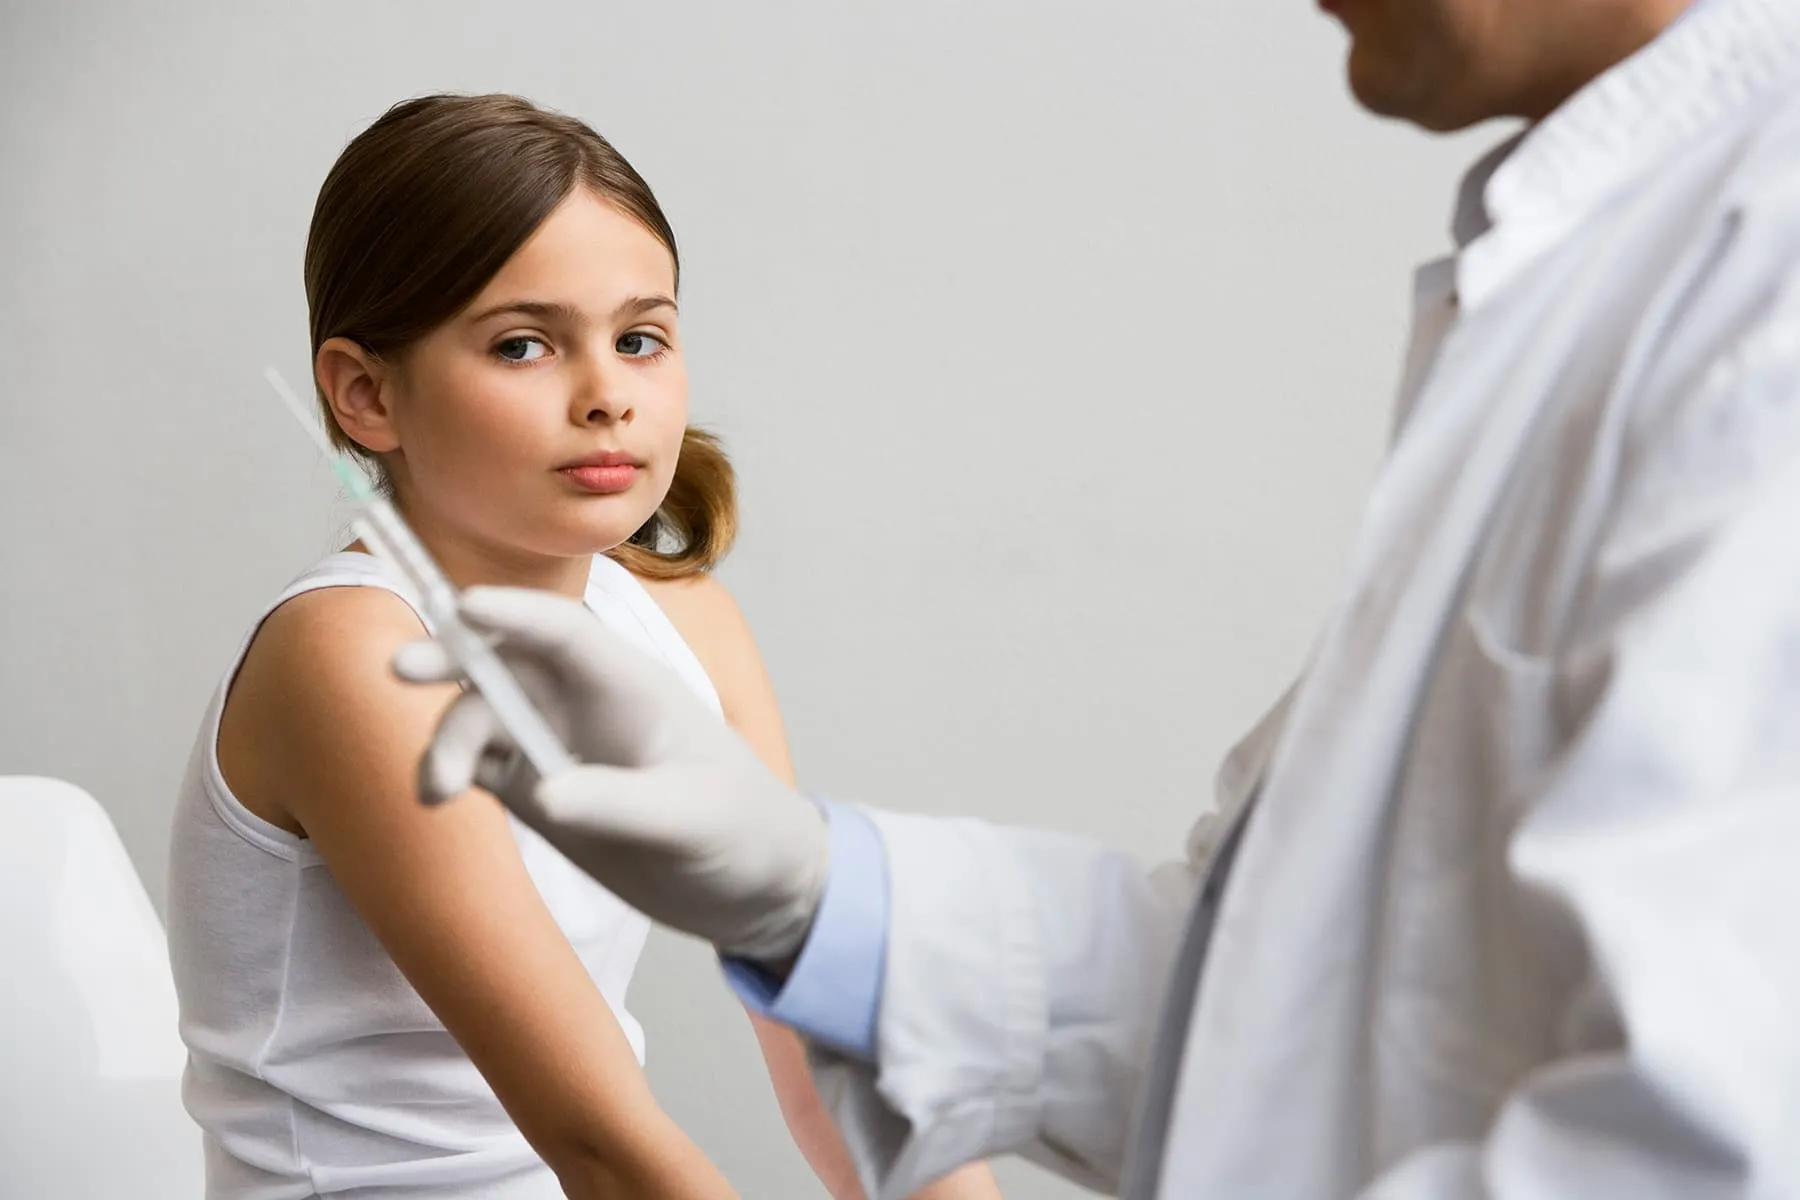 Pandemic Noticed Rise in Distrust of Childhood Vaccines Worldwide